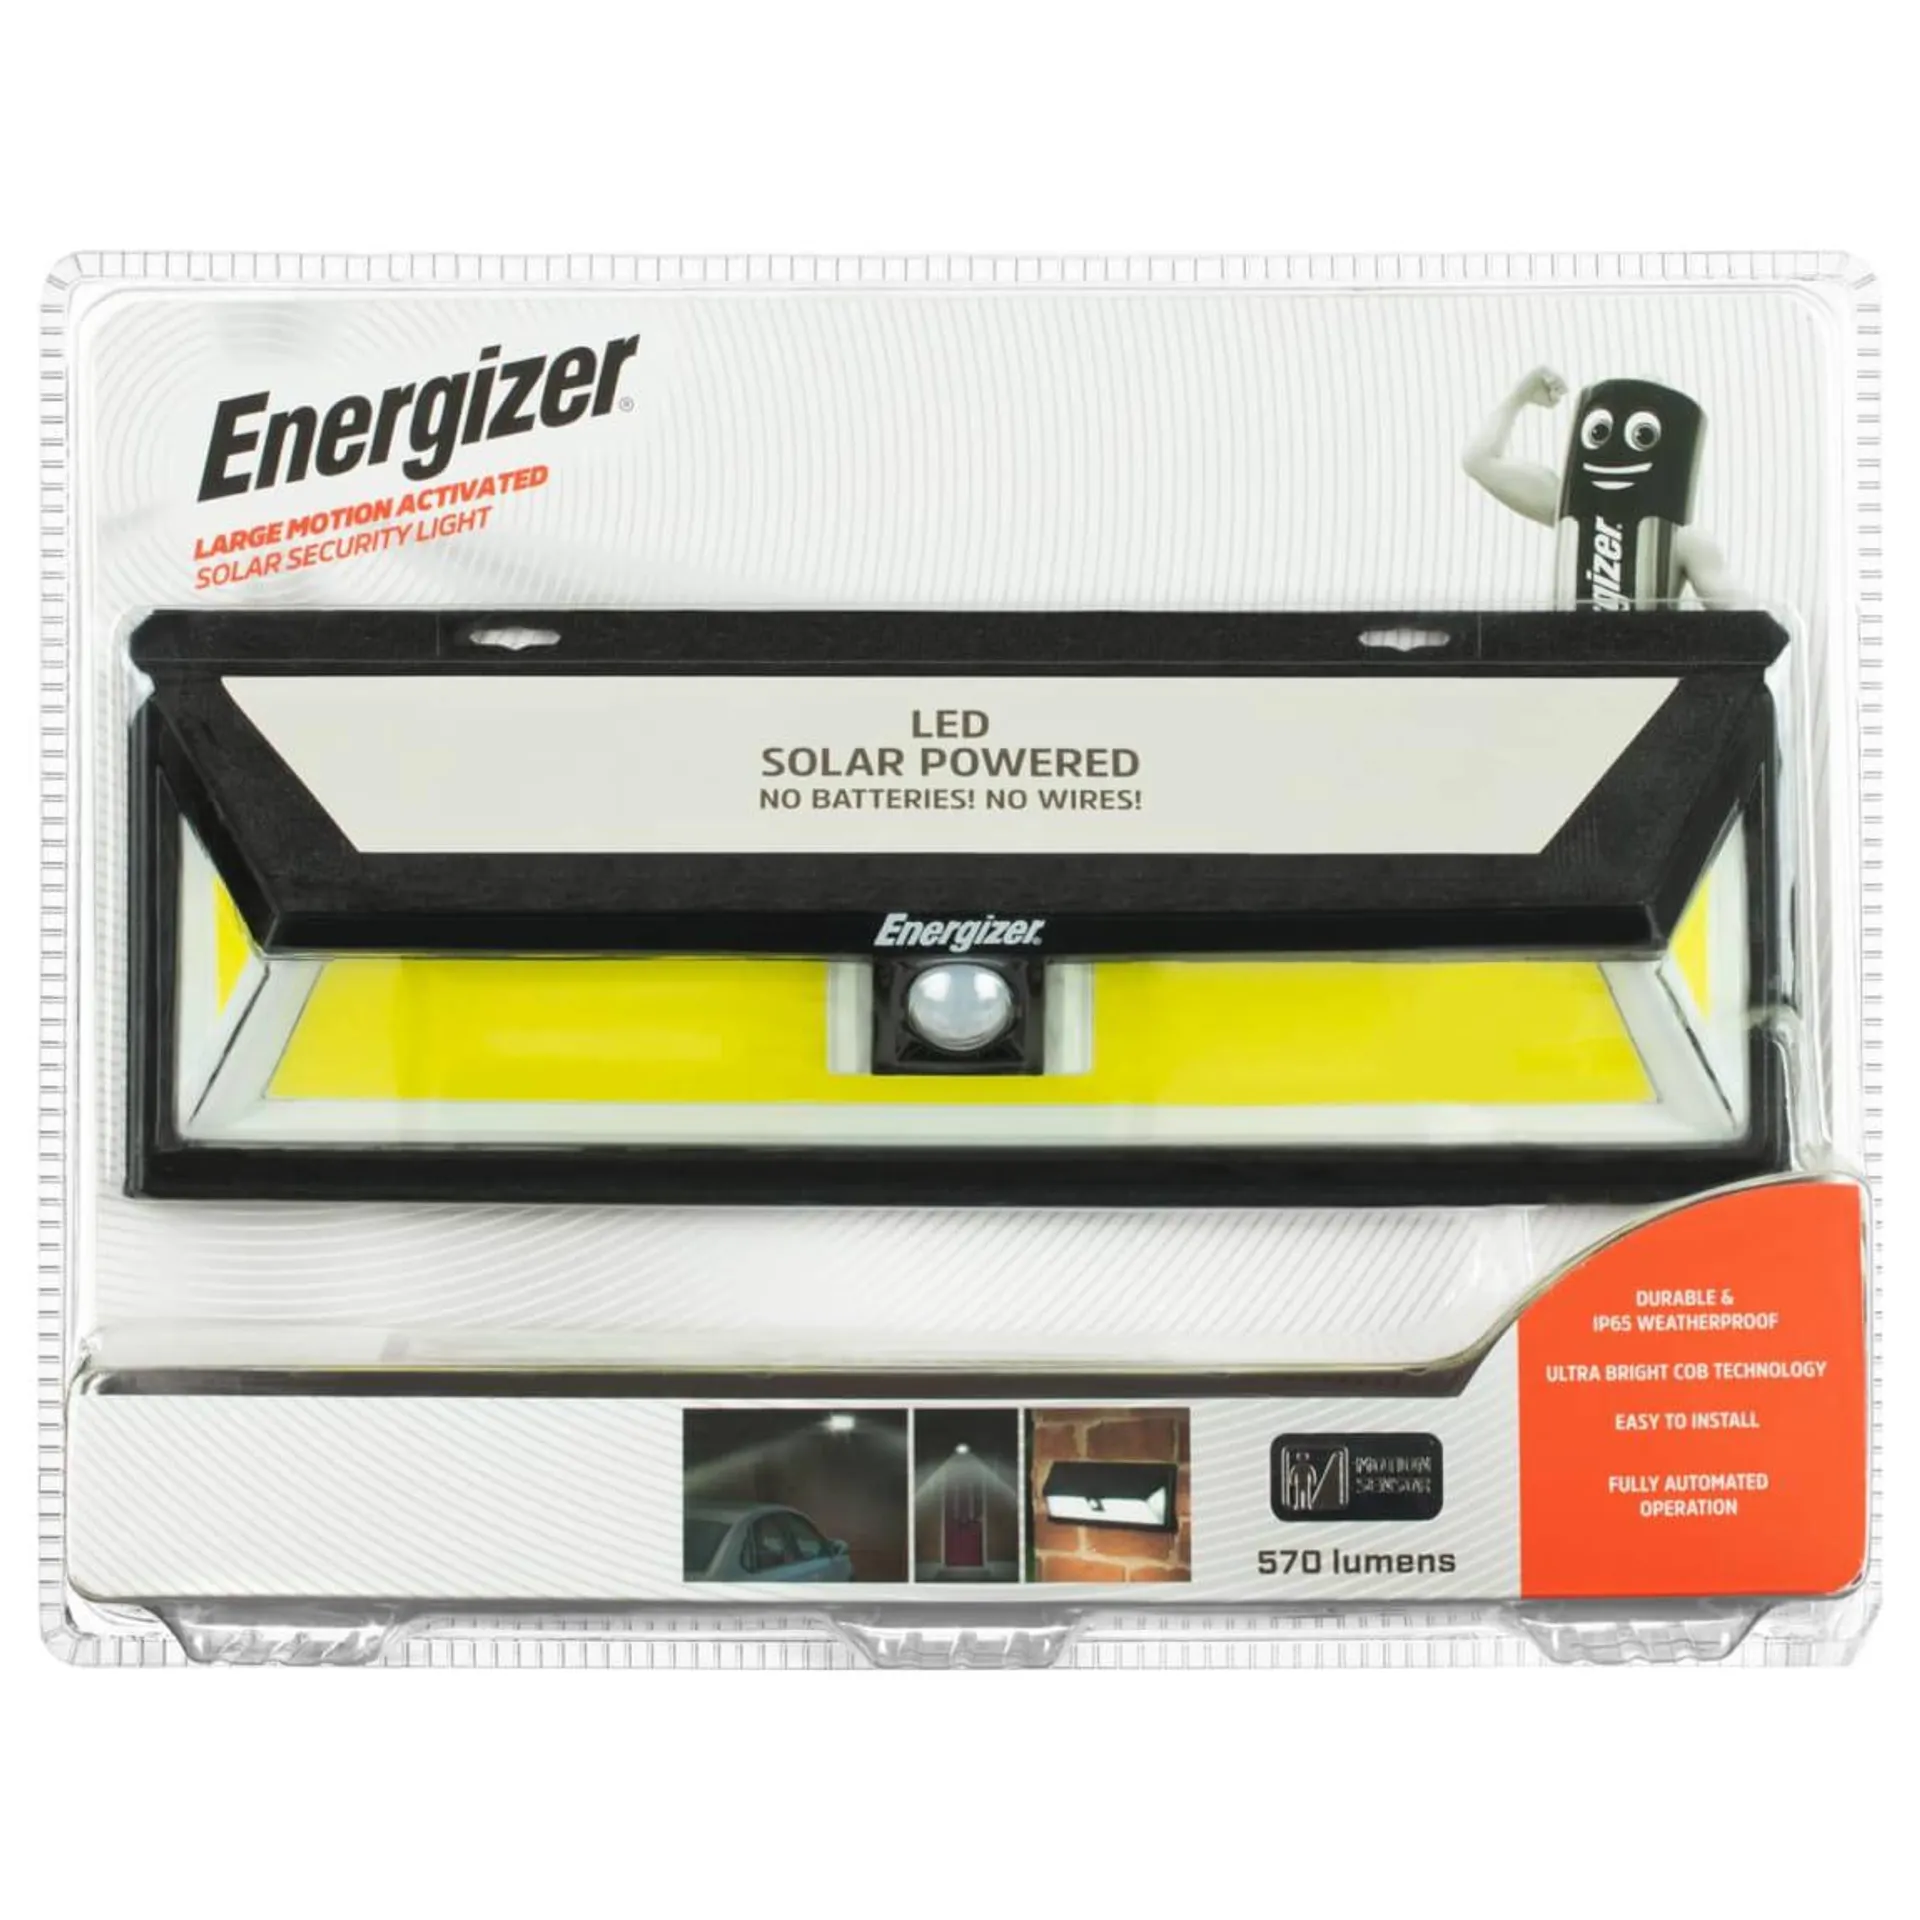 Energizer Large Motion Activated Solar Security Light